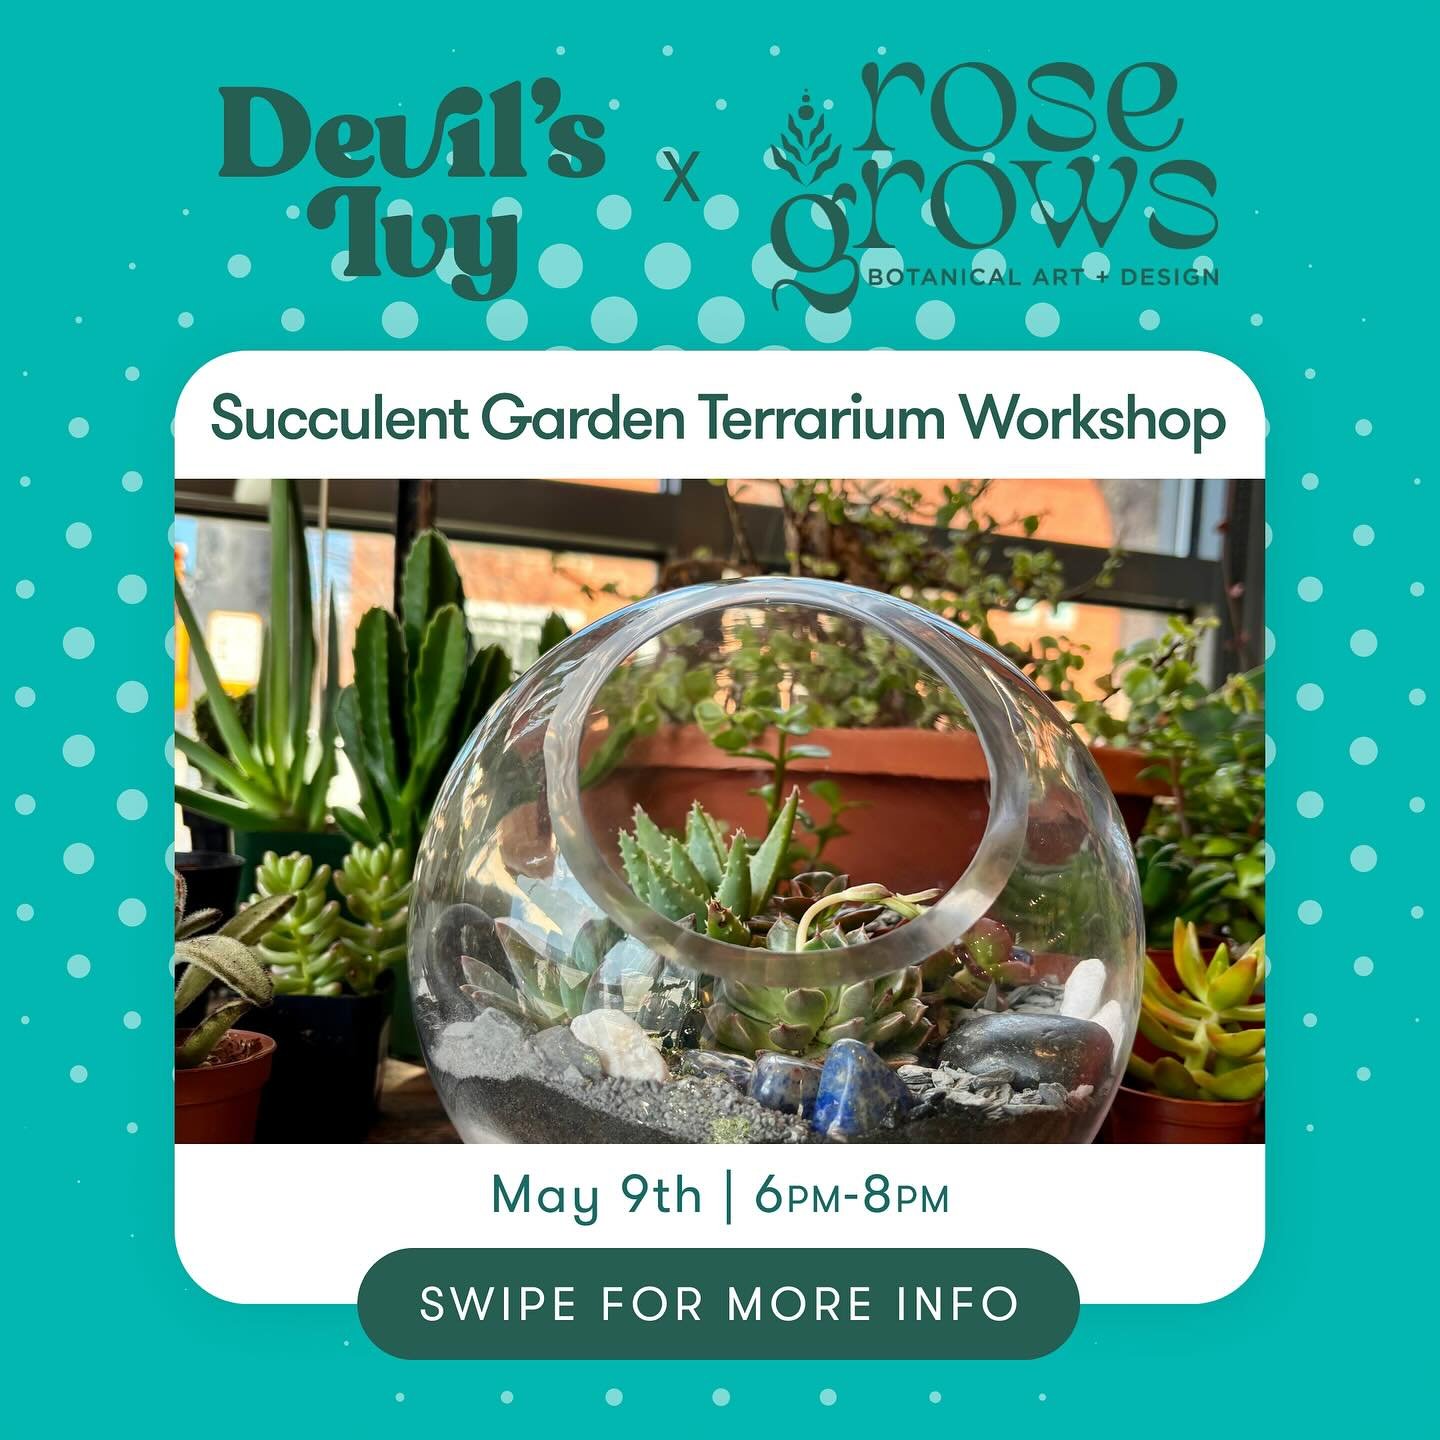 Join @devils_ivy_denver and @_rosegrows_ Thursday, May 9th to unleash your creativity in our hands-on Succulent Garden Terrarium Workshop!

In this immersive class, you&rsquo;ll learn the art of terrarium design, from selecting the perfect succulents